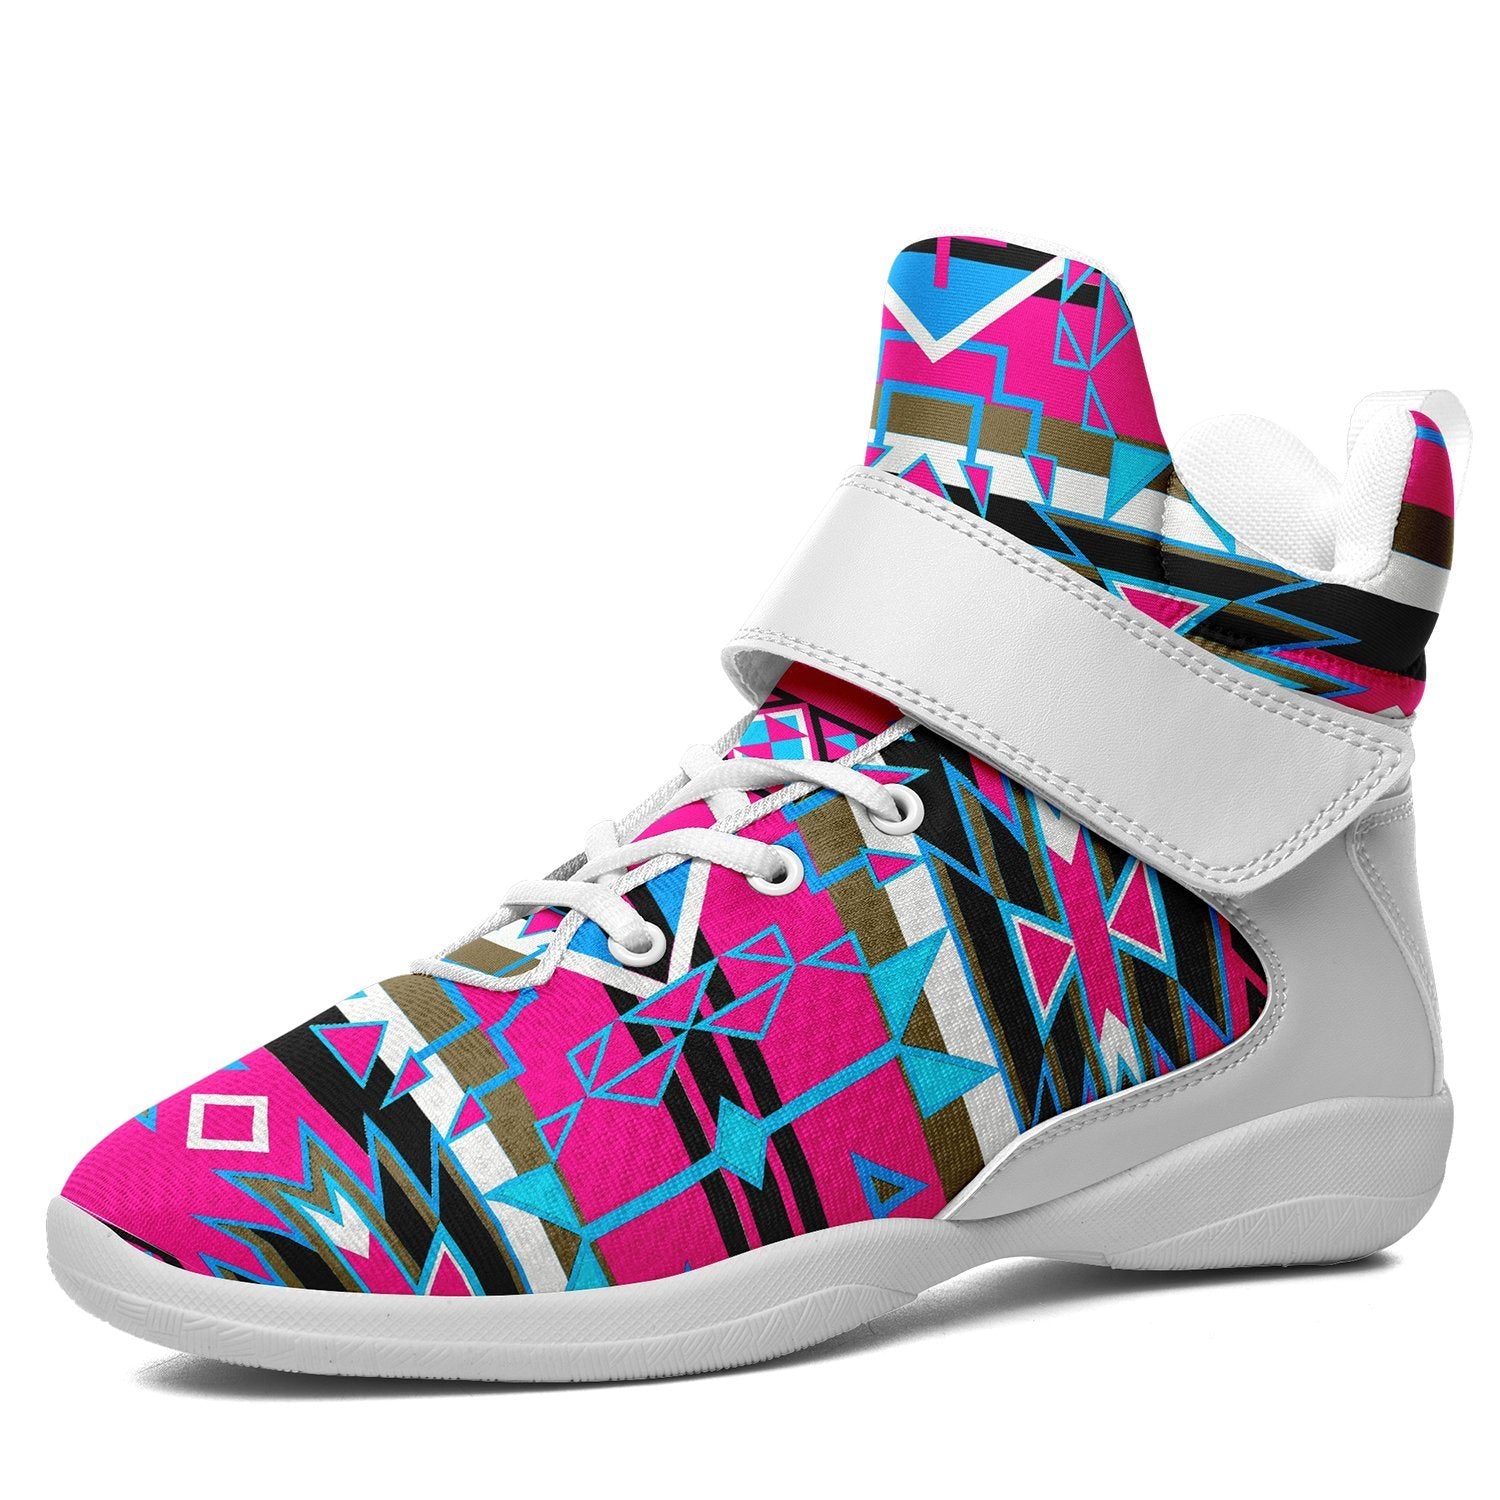 Force of Nature Sunset Storm Ipottaa Basketball / Sport High Top Shoes 49 Dzine US Women 4.5 / US Youth 3.5 / EUR 35 White Sole with White Strap 